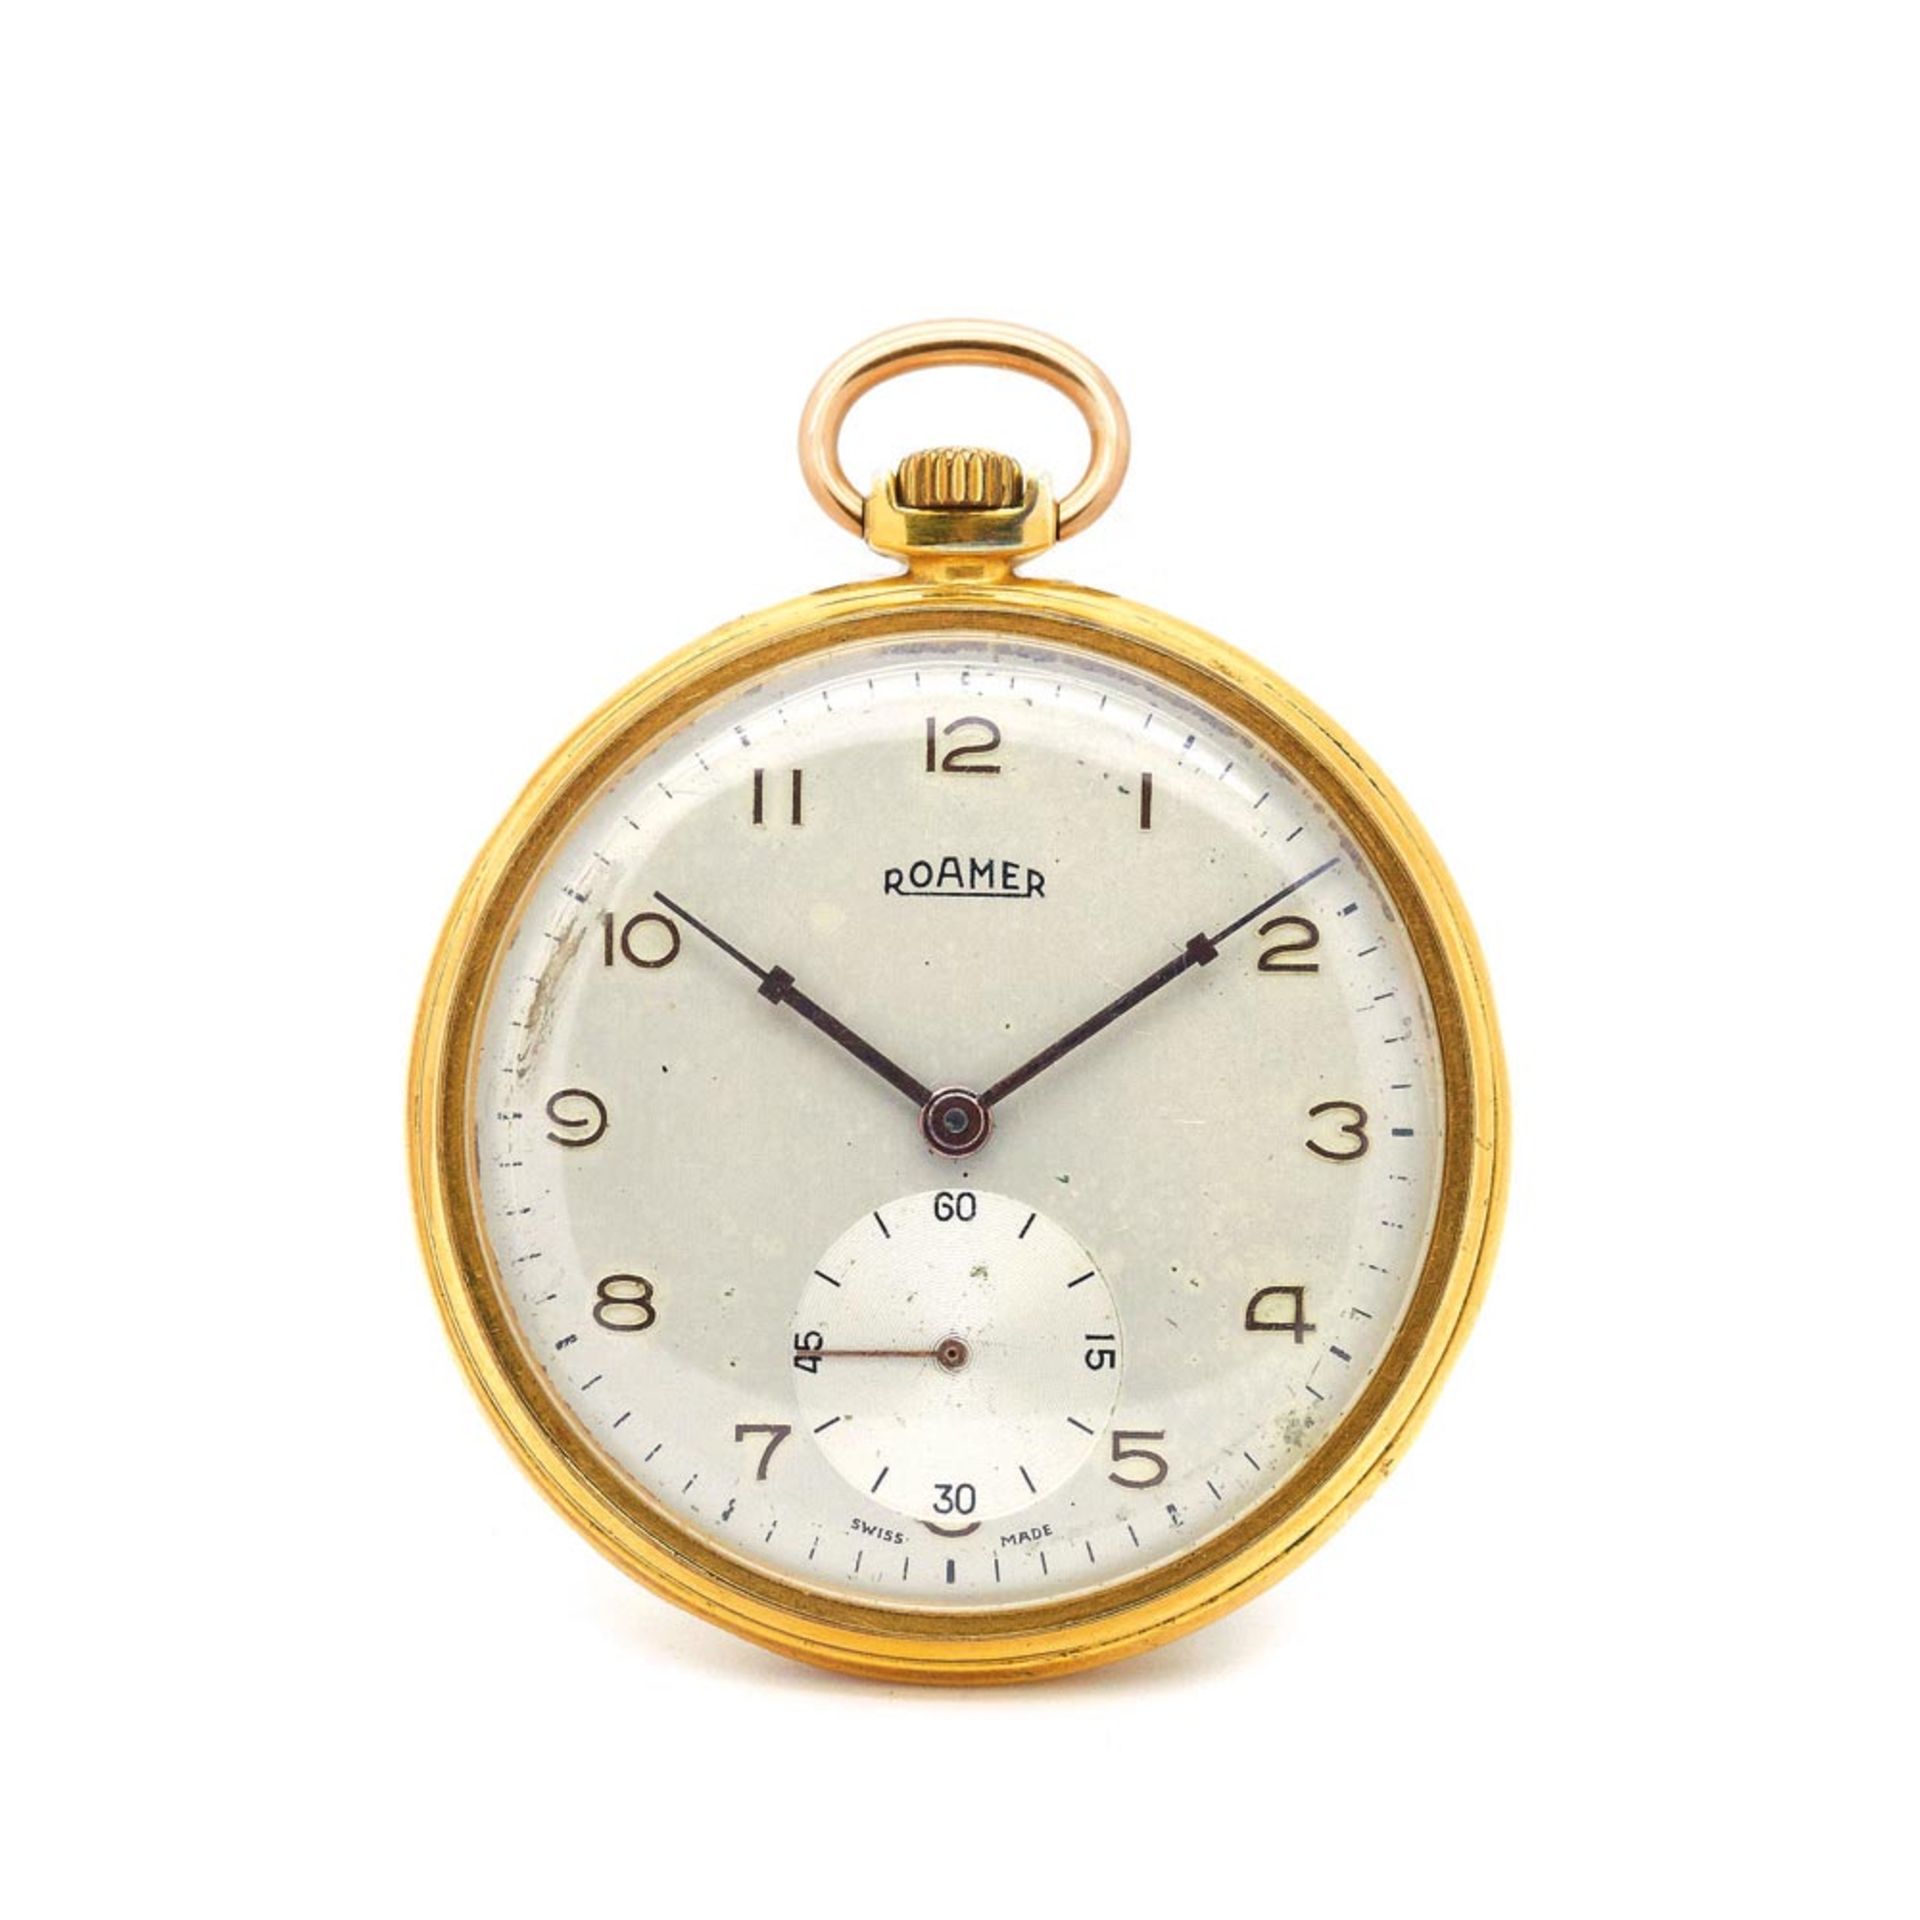 Roamer gold plated metal lepine pocket watch early 20th century